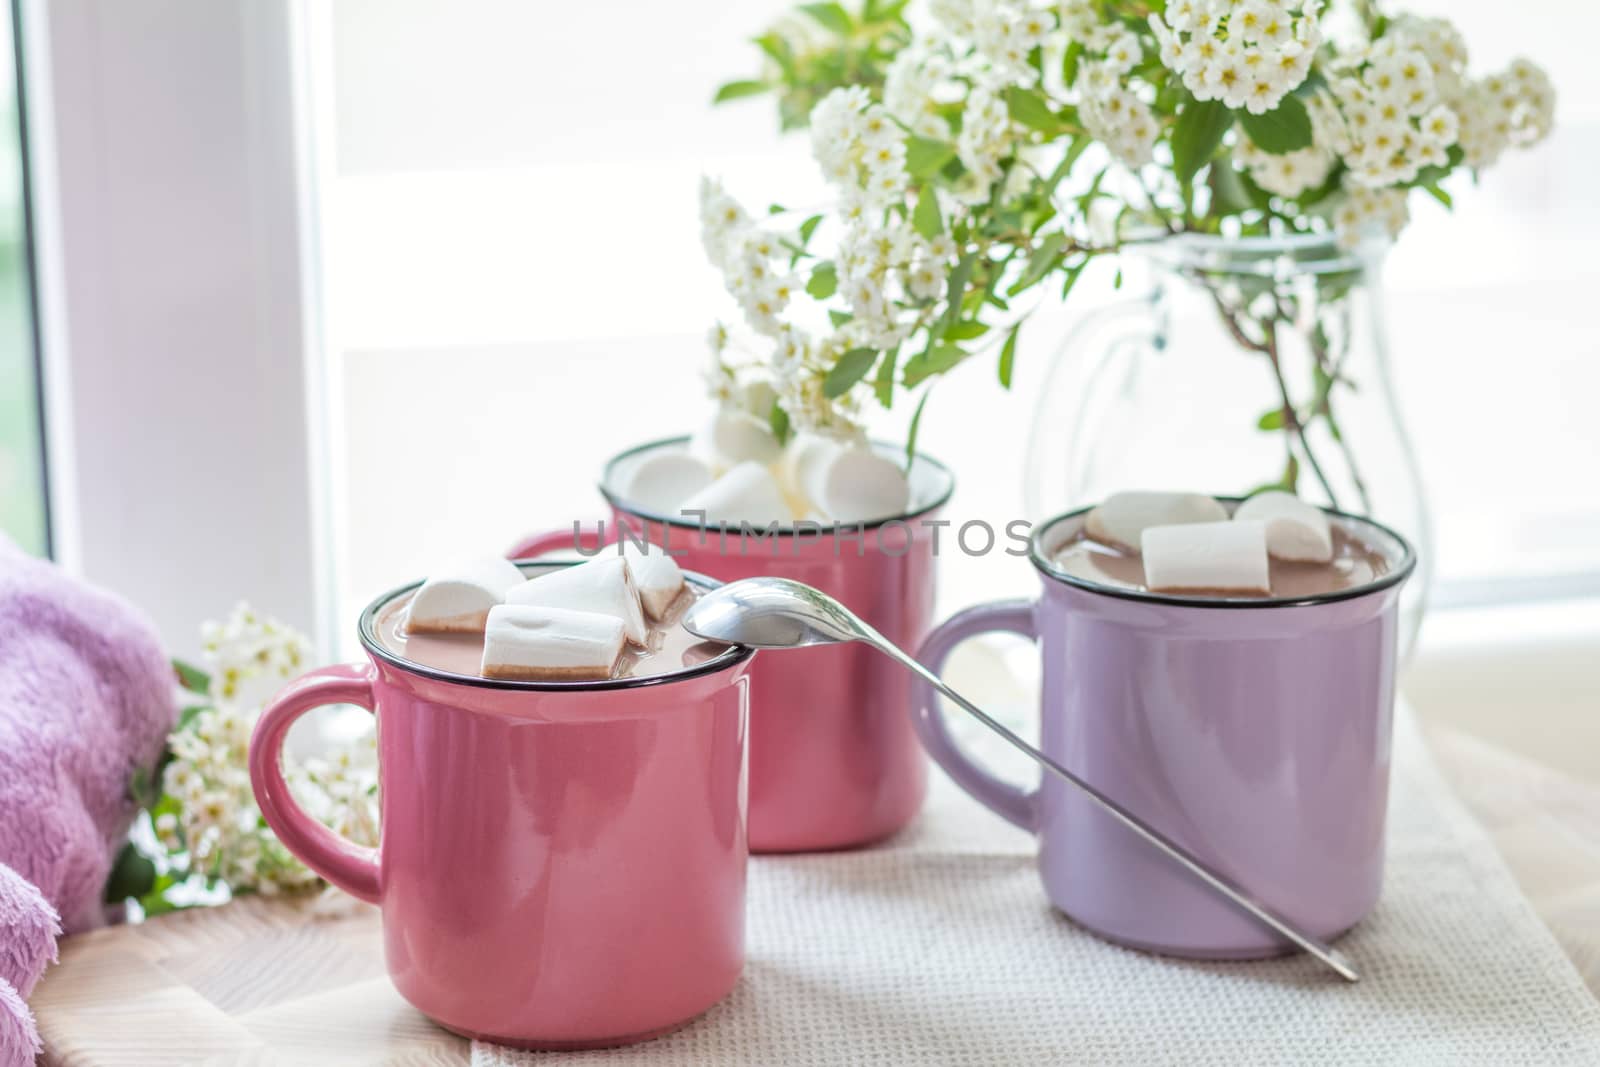 Marshmallows on top of hot cocoa in pink cups on the white napkin on the windowsill. Fresh white spring flowers are framing the image. Cozy home concept. Shallow depth of field